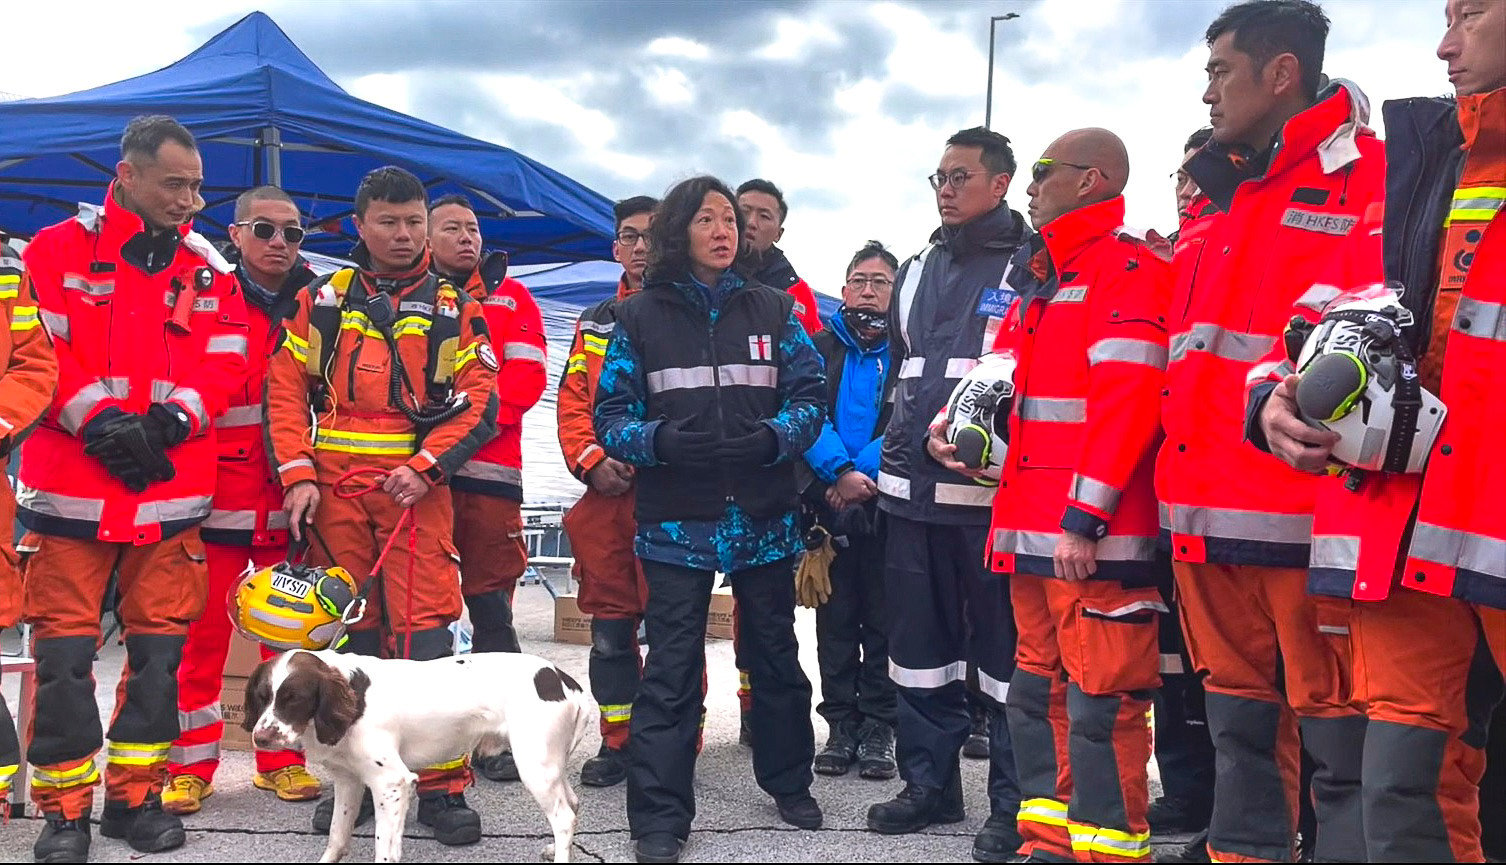 Dr Cecilia Fan (centre), talks with other members of Hong Kong’s rescue team amid relief efforts in Turkey last year. Photo: Handout